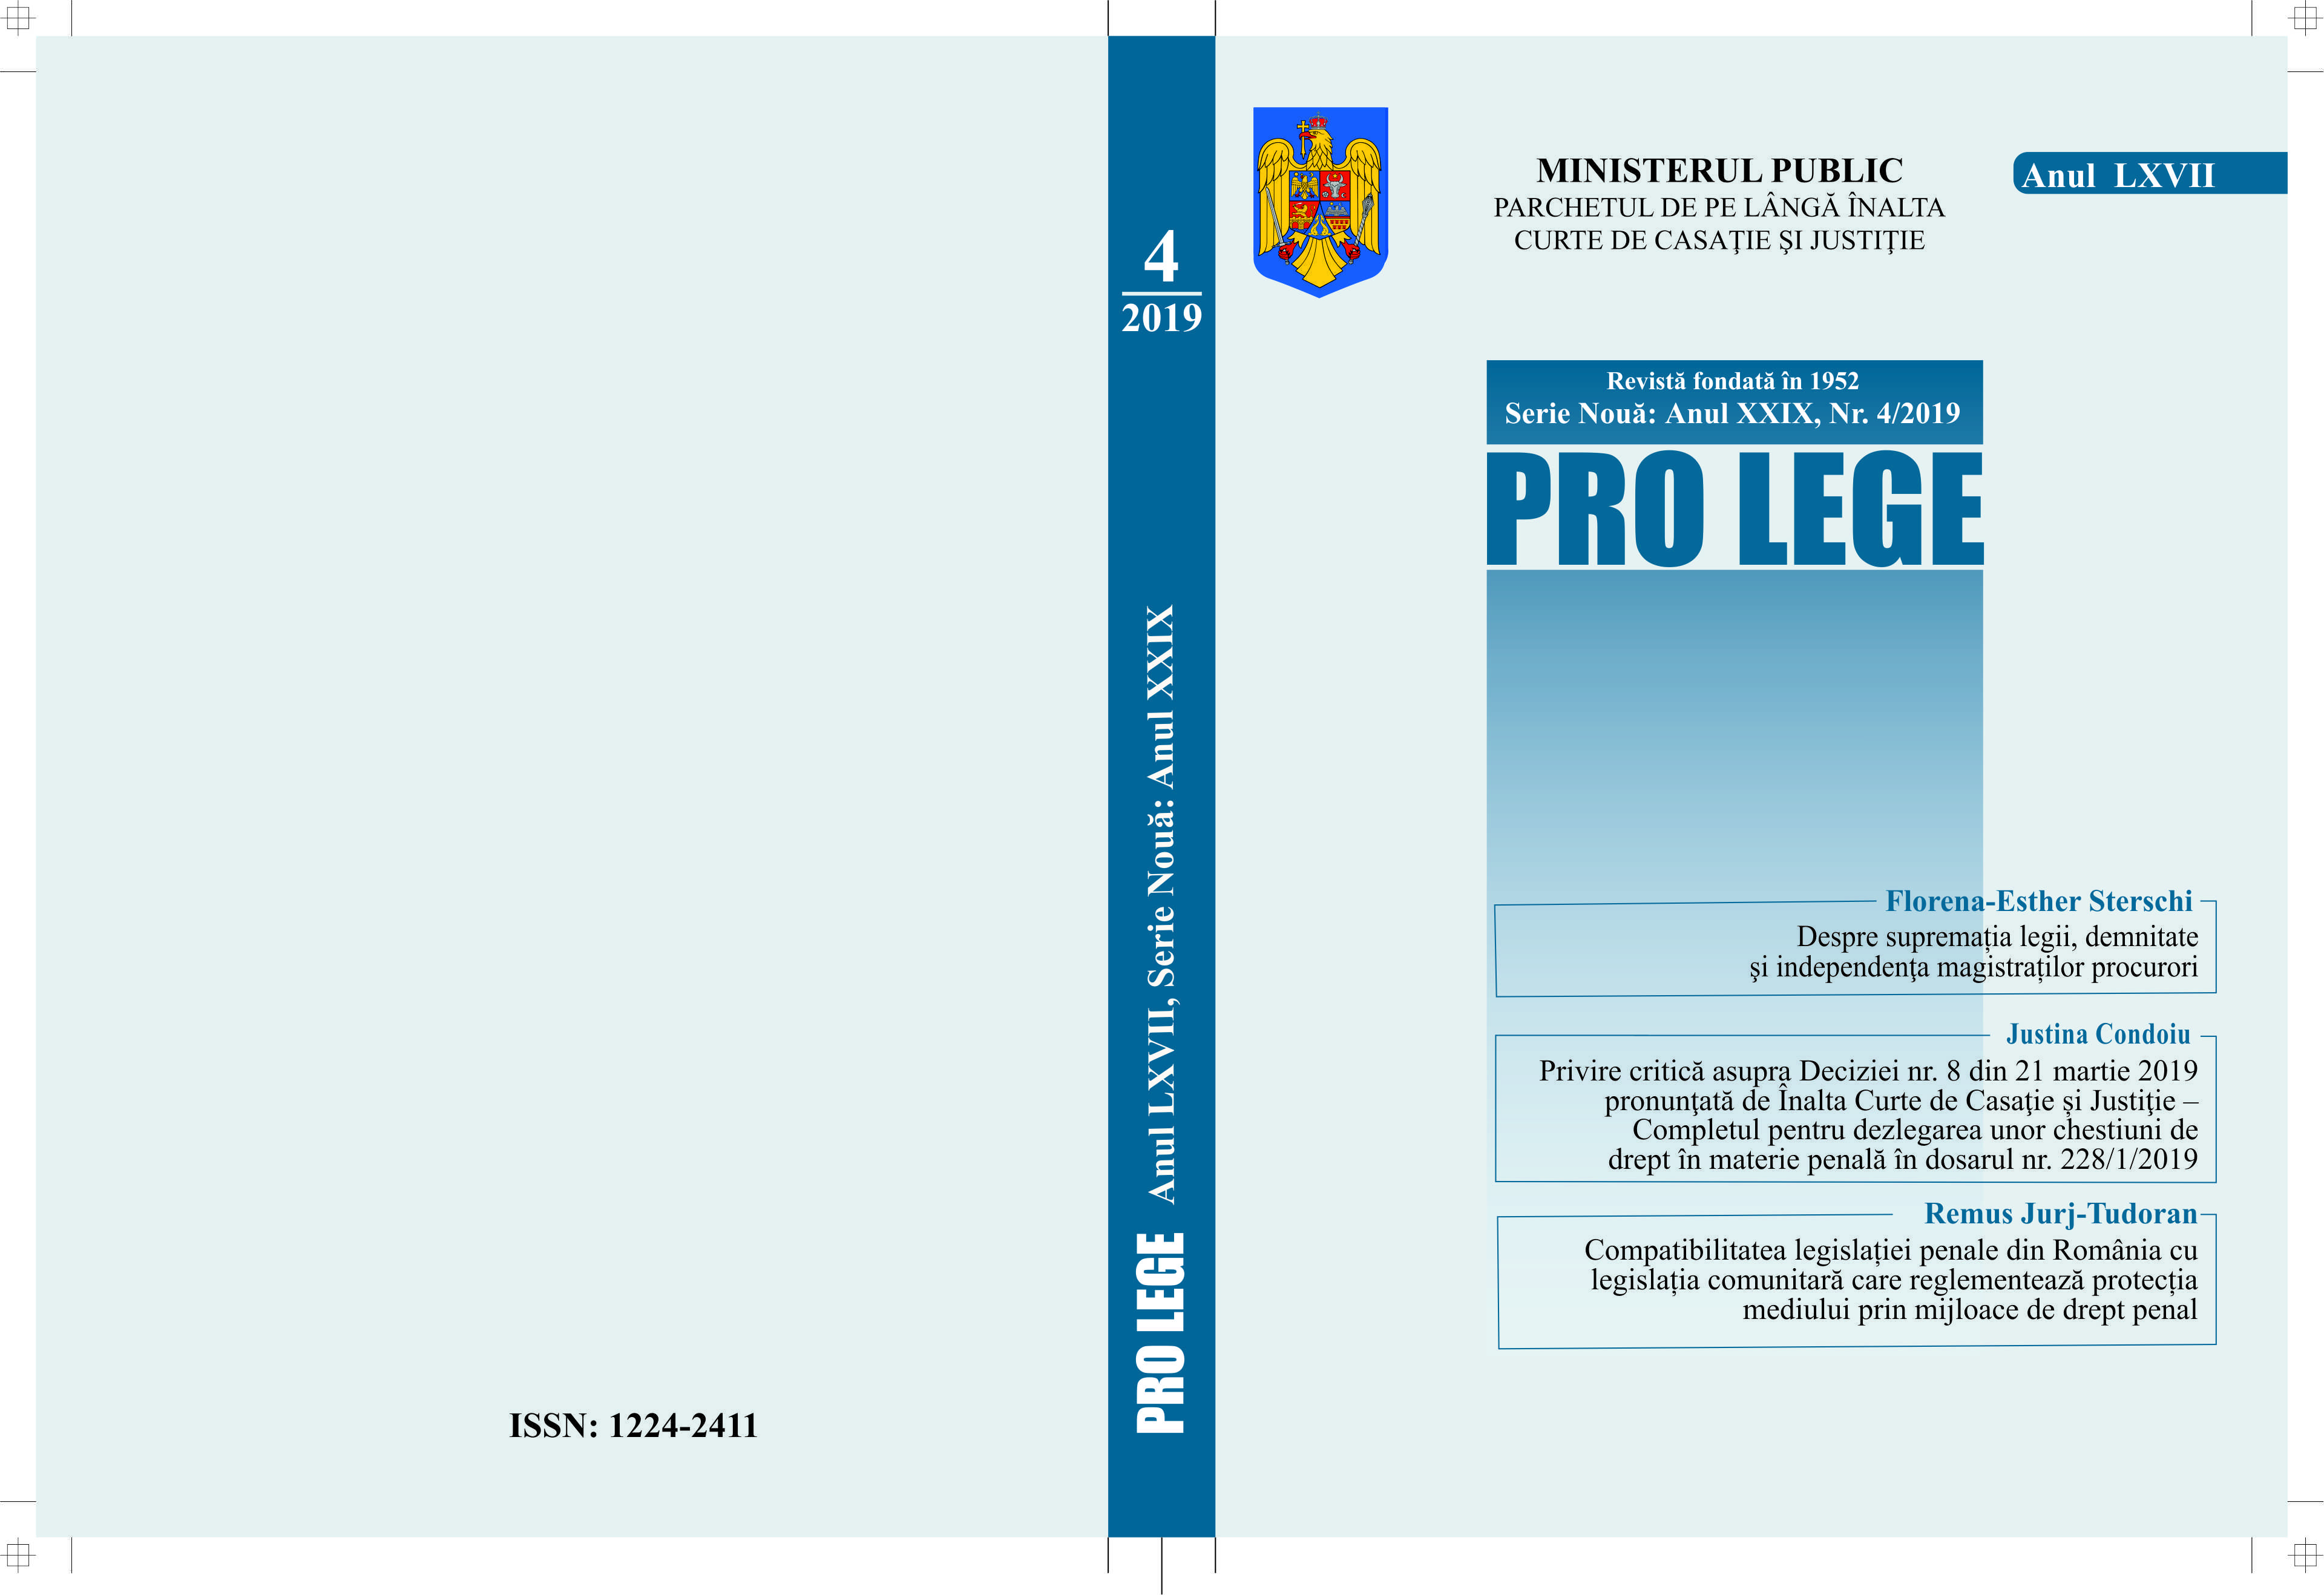 The official misconduct provided by Art. 99 lit. s) and t) of the Law no. 303/2004 regarding the status of judges and prosecutors. Jurisprudence Cover Image